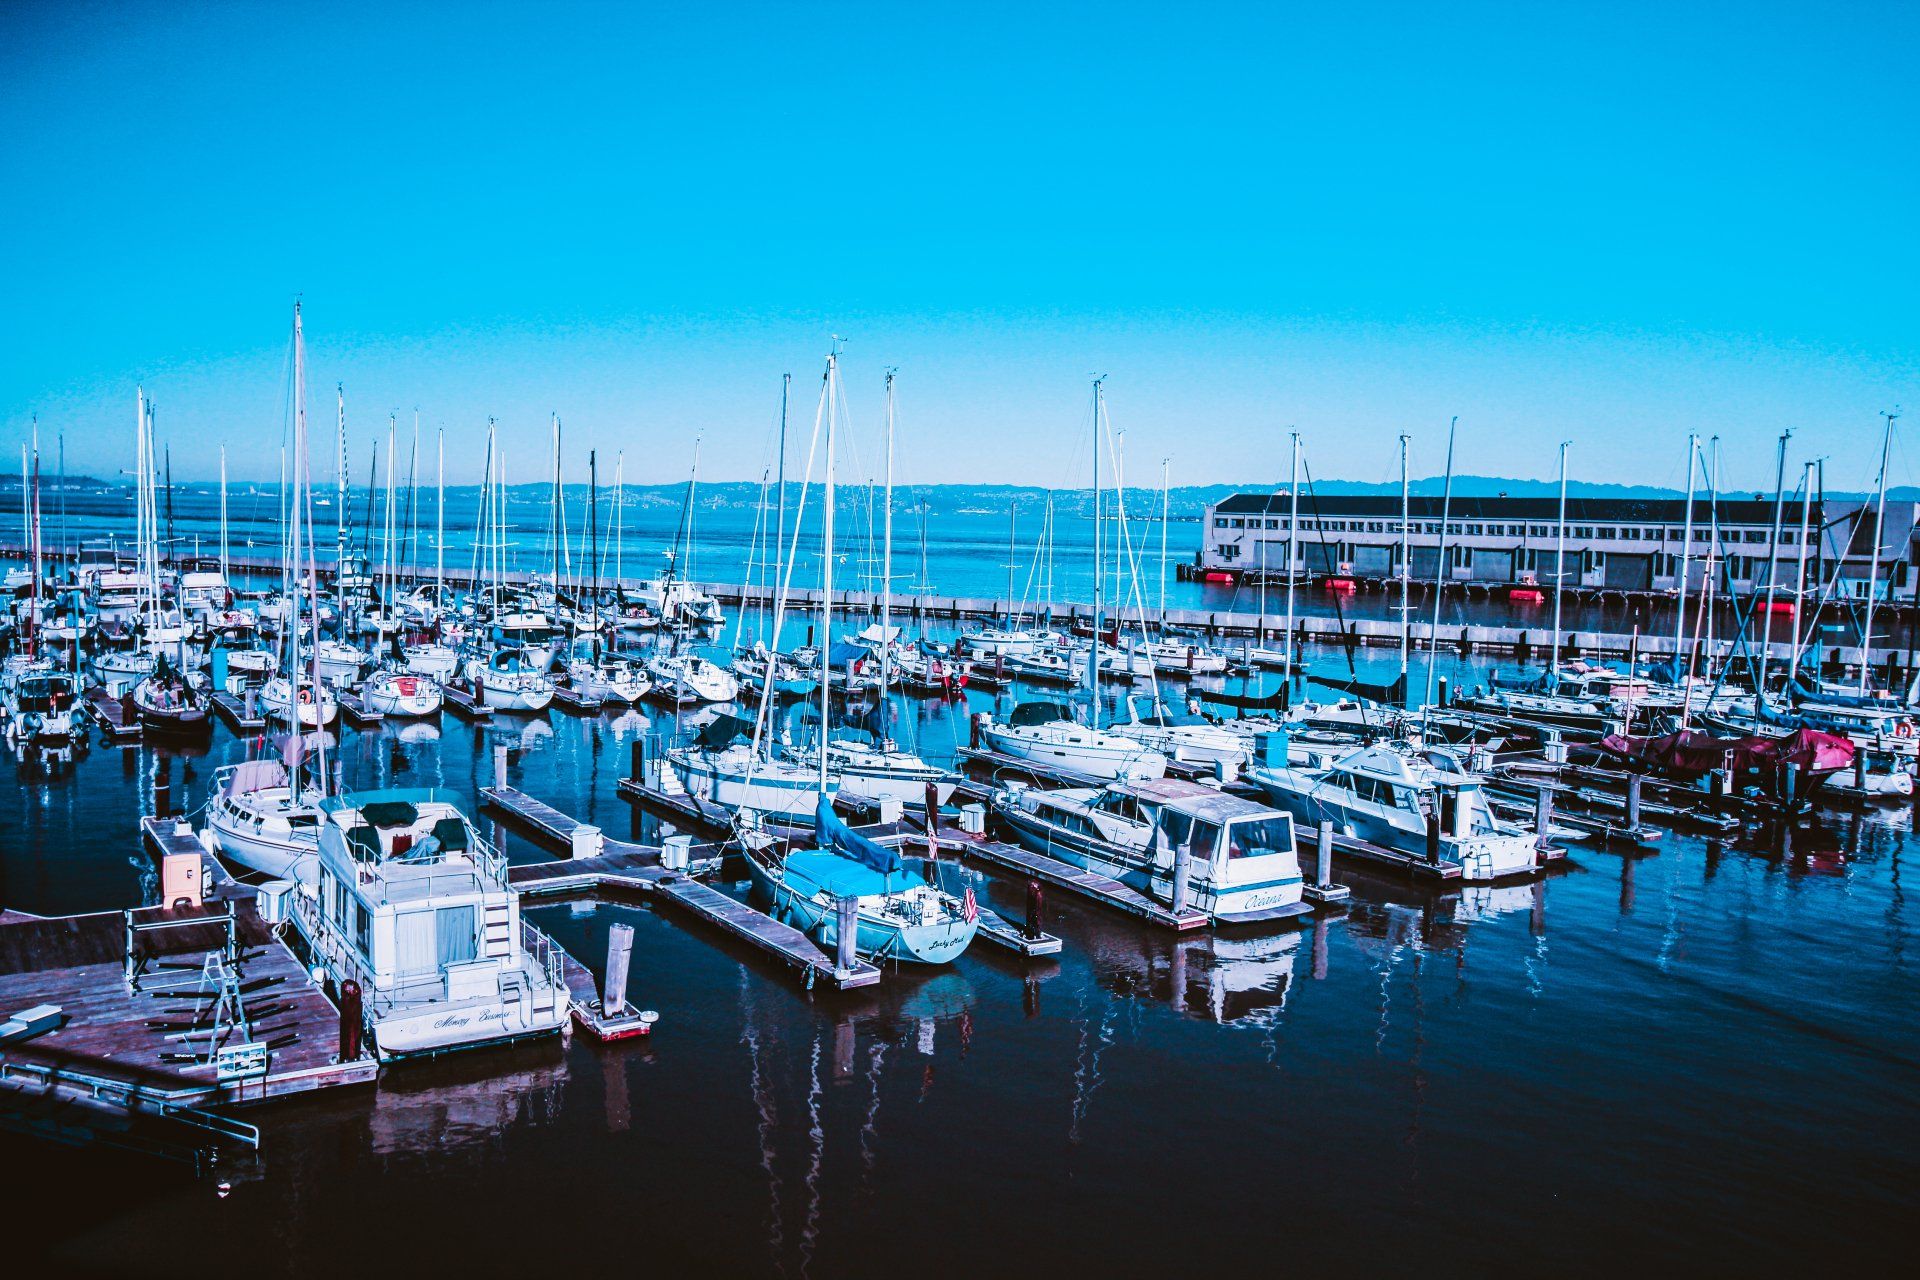 A row of boats are docked in a marina on a sunny day.